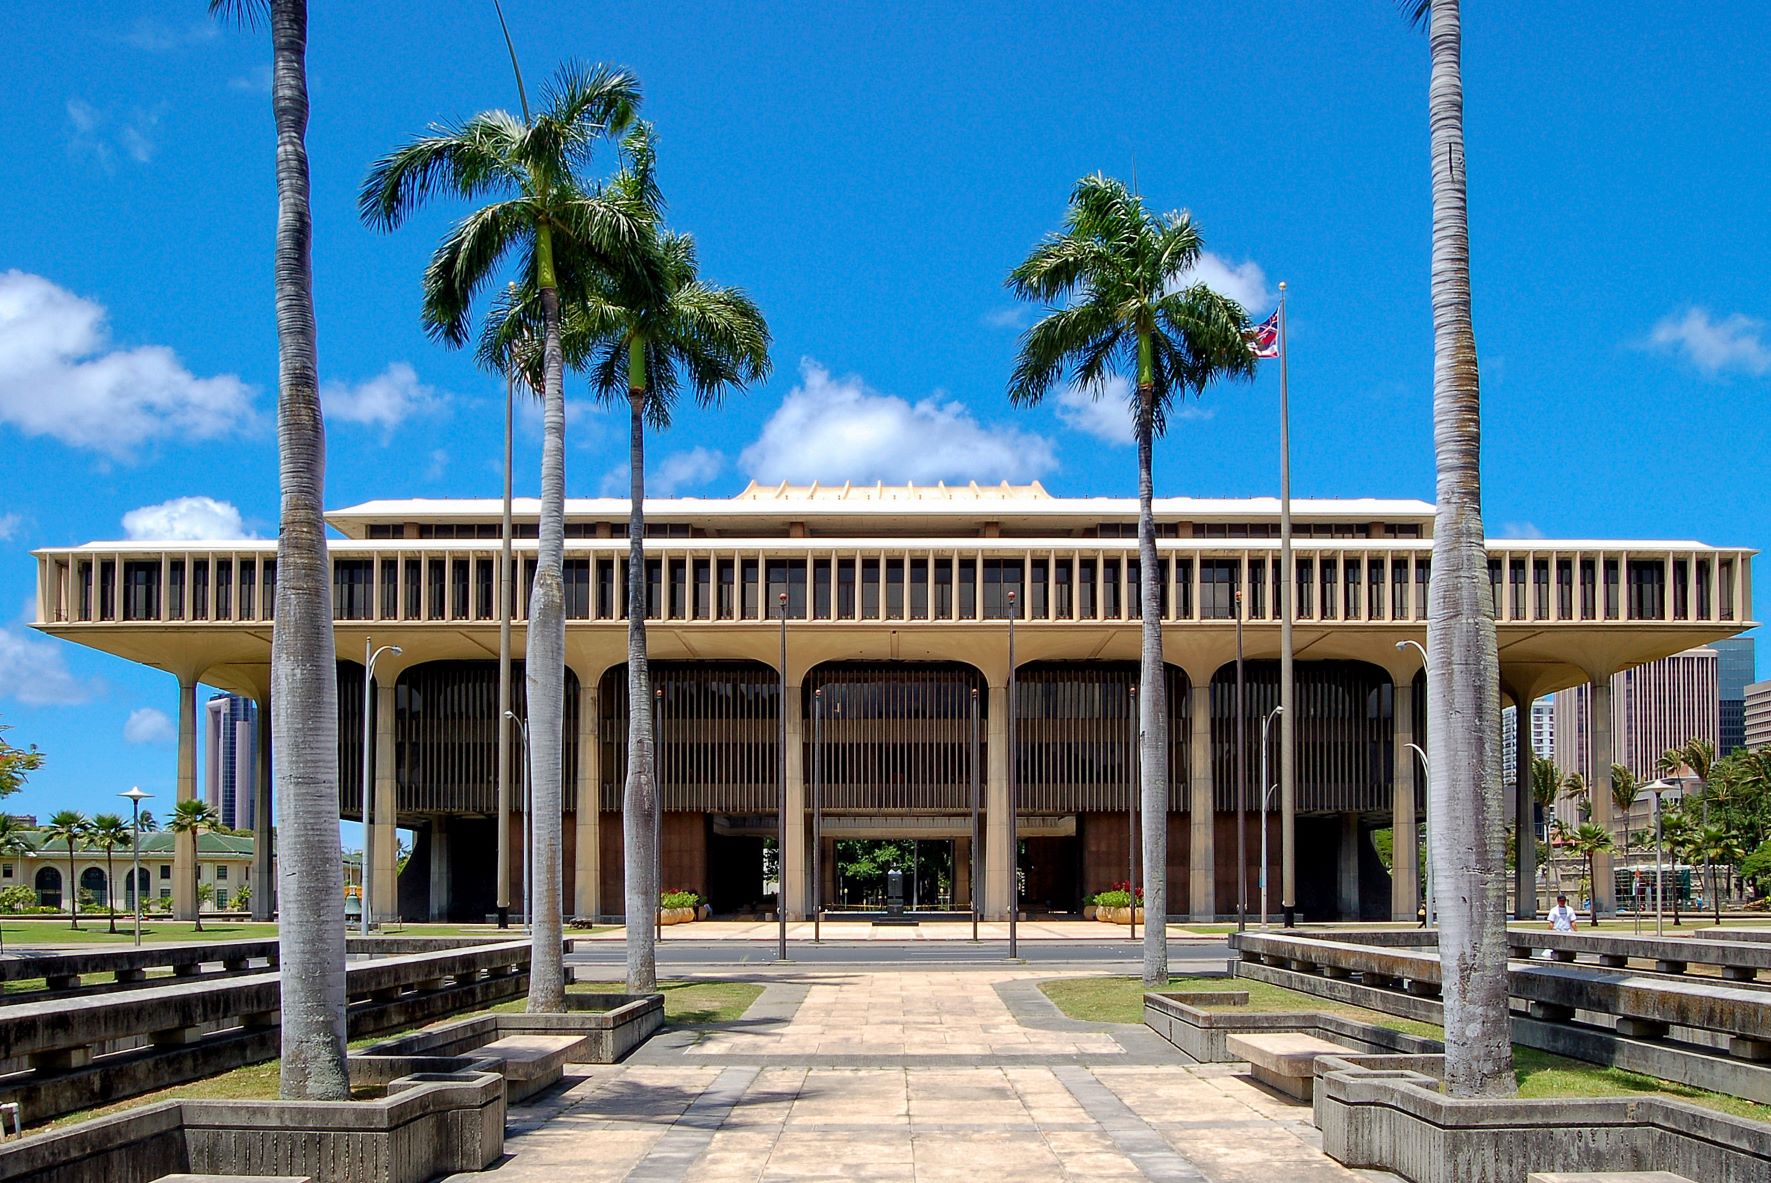 Image of the front of the Hawaii State Capitol building